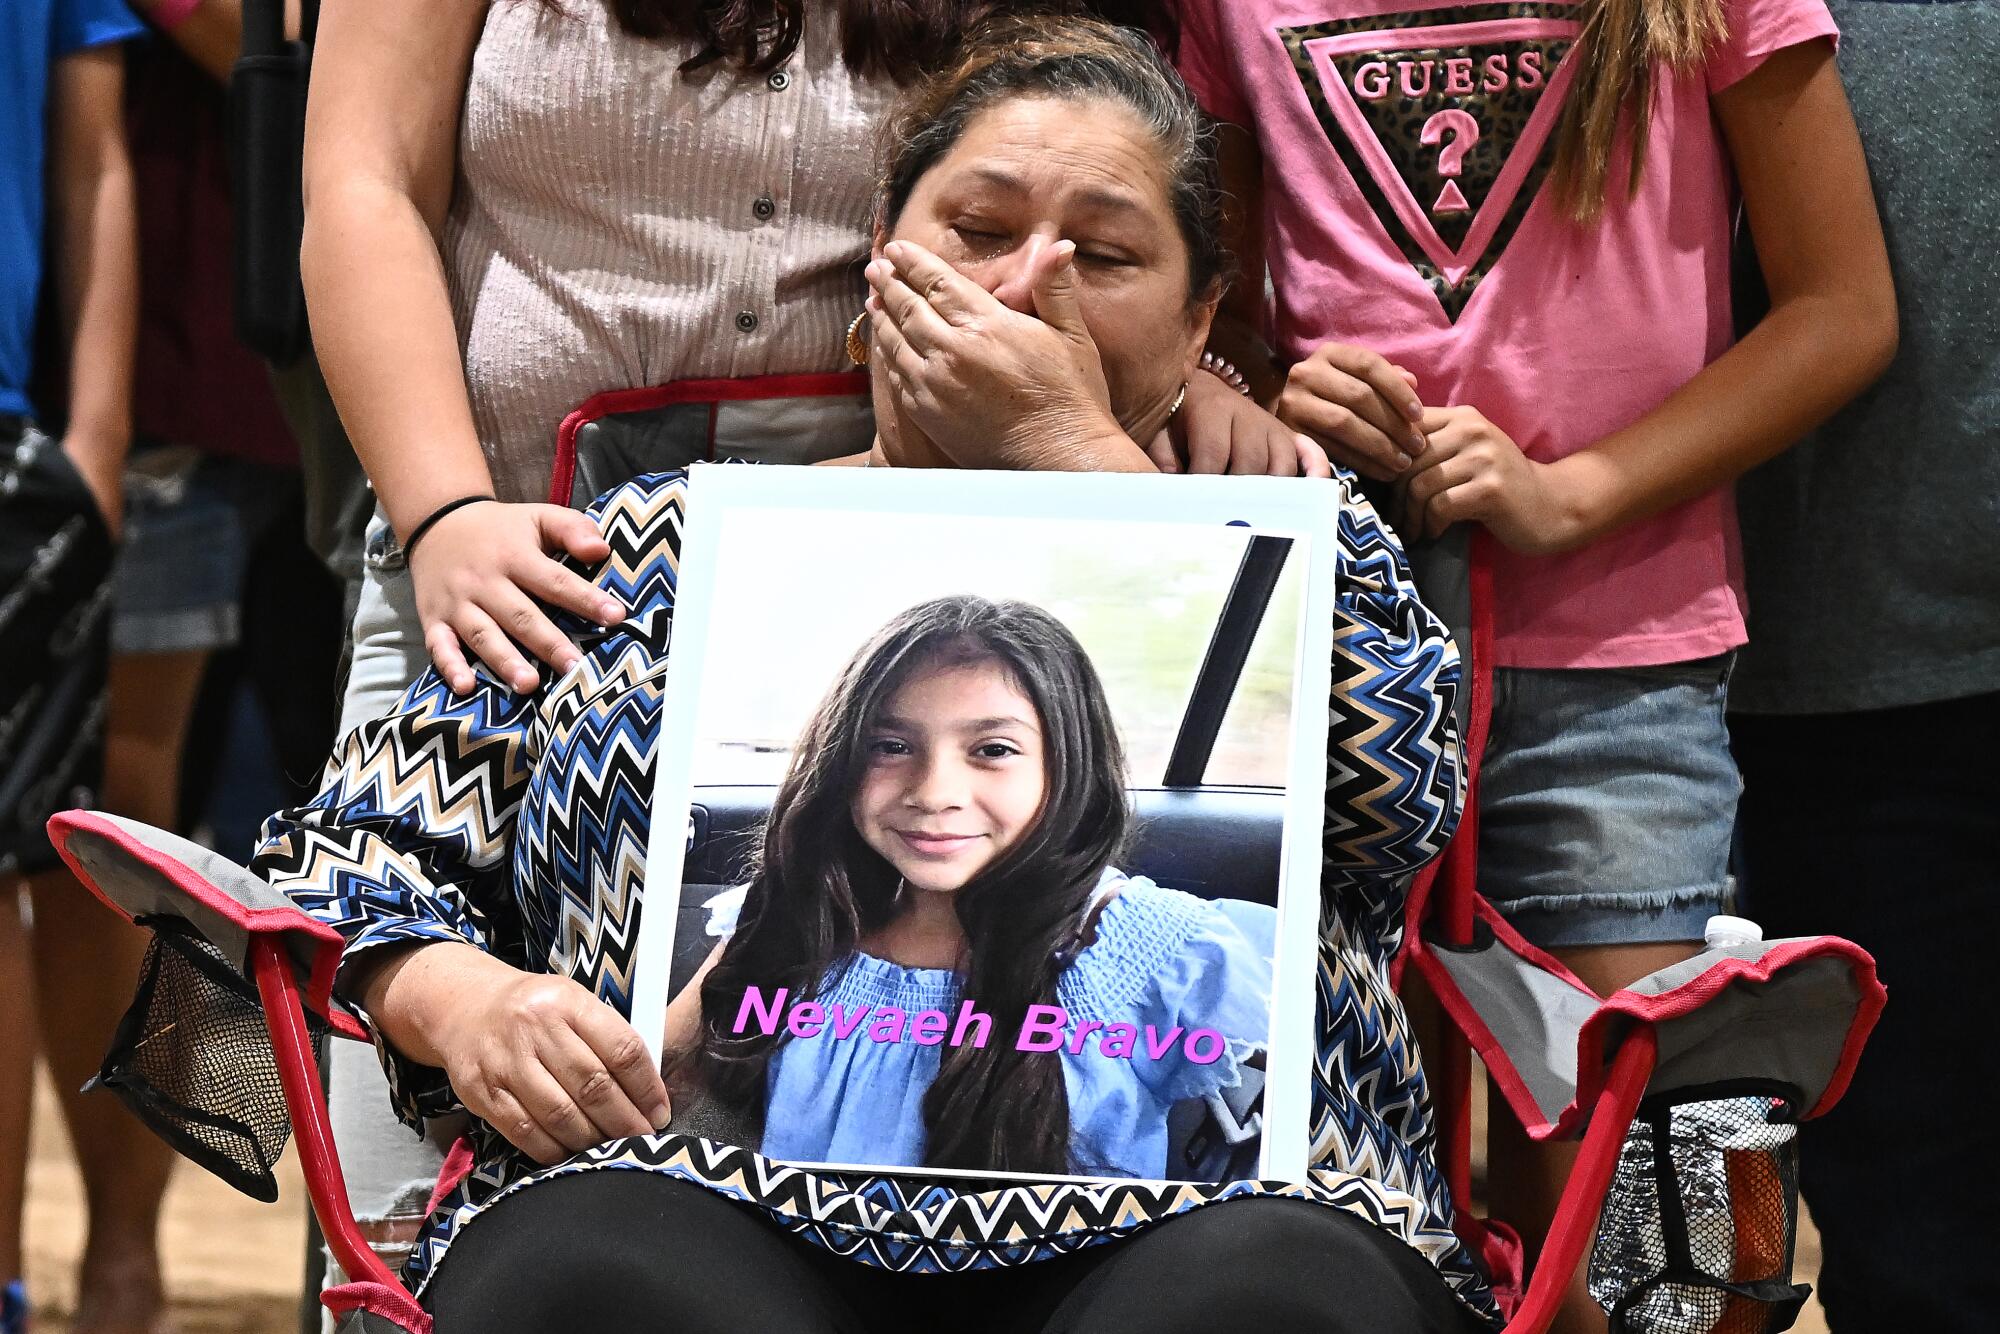 A seated woman with a hand to her face holds a picture of a girl with long dark hair and the name Nevaeh Bravo